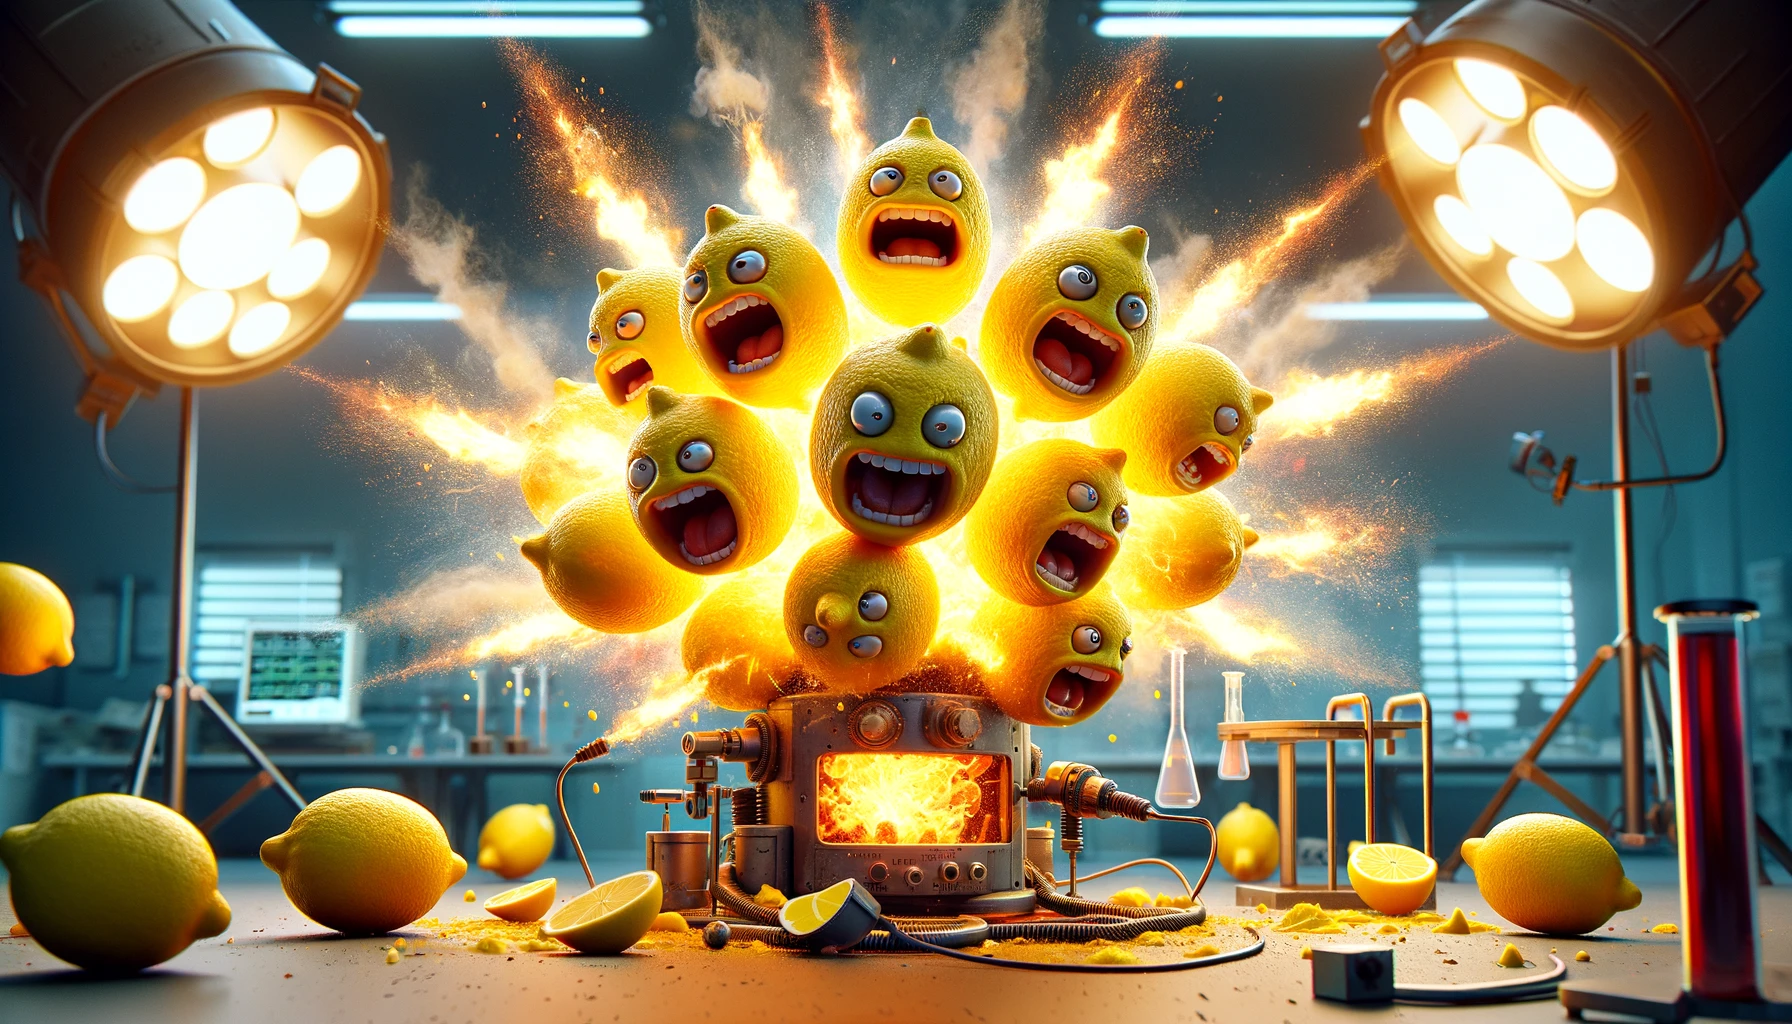 Envision a dynamic widescreen scene of combustible lemons, a whimsical concept where lemons have the explosive potential. These lemons are depicted mid-explosion, with bursts of flames and sparks coming from within, against a background that suggests a laboratory or a testing facility. The scene is illuminated by the bright, fiery glow of the lemons exploding, casting light on nearby scientific equipment and protective gear. The lemons themselves have a cartoonish, exaggerated appearance, with fierce, determined expressions as if they're embracing their explosive nature. The overall scene is a blend of humor and chaos, capturing the imagination of what it would be like if lemons could indeed combust, adding an element of surprise and unpredictability to a seemingly mundane fruit.